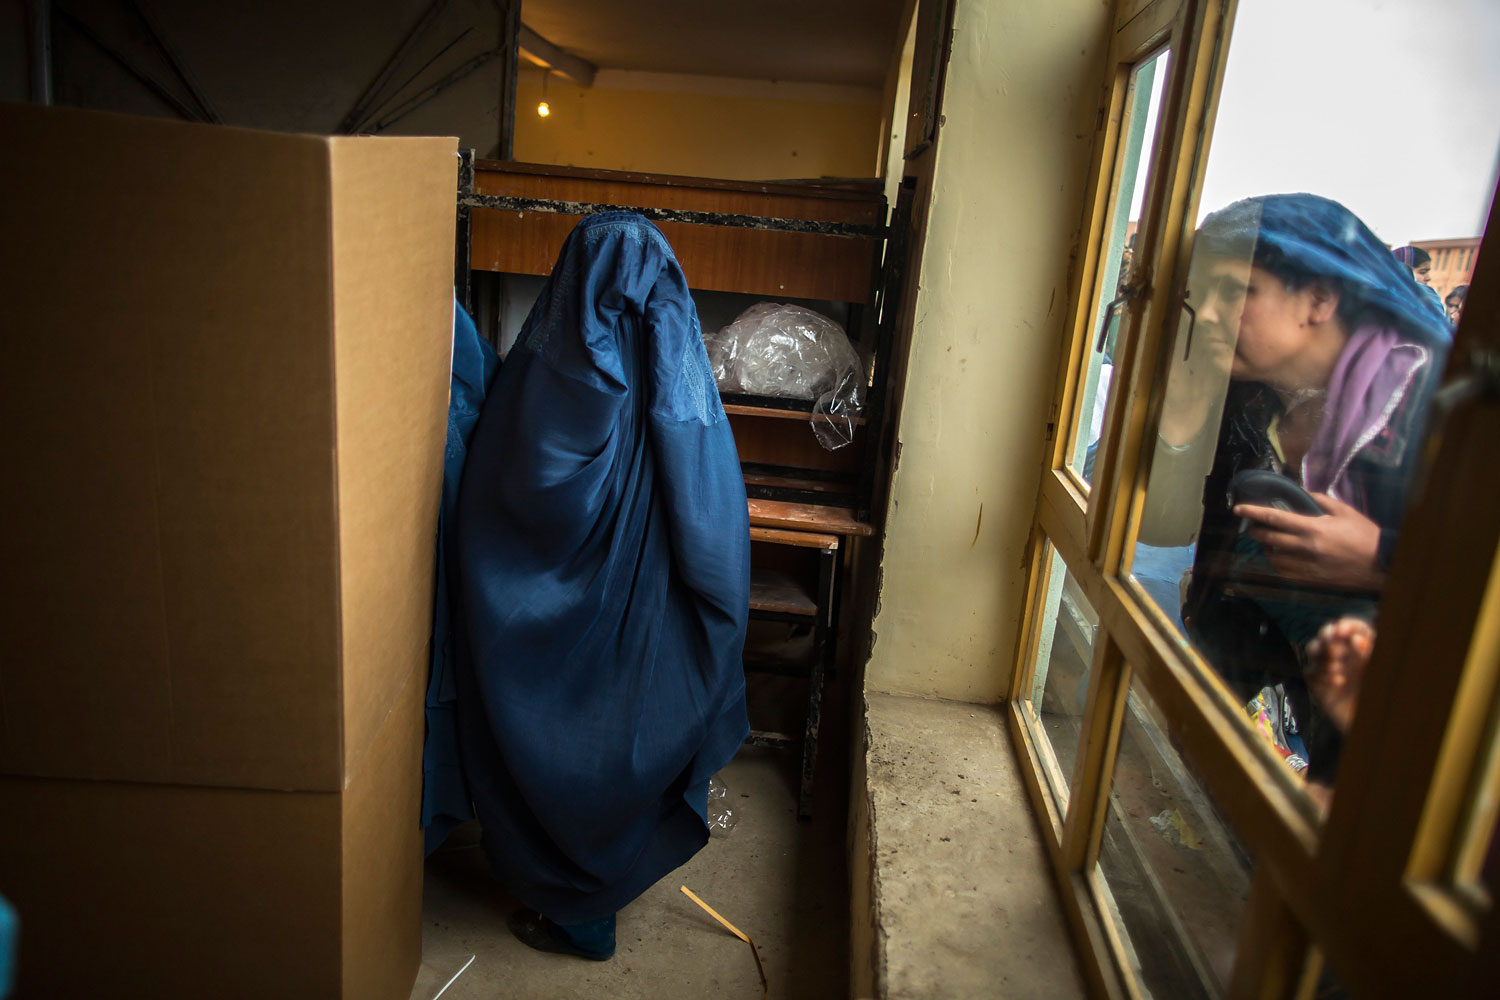 An Afghan woman looks through a window as another is about to cast her ballot at a polling station in Mazar-i-Sharif